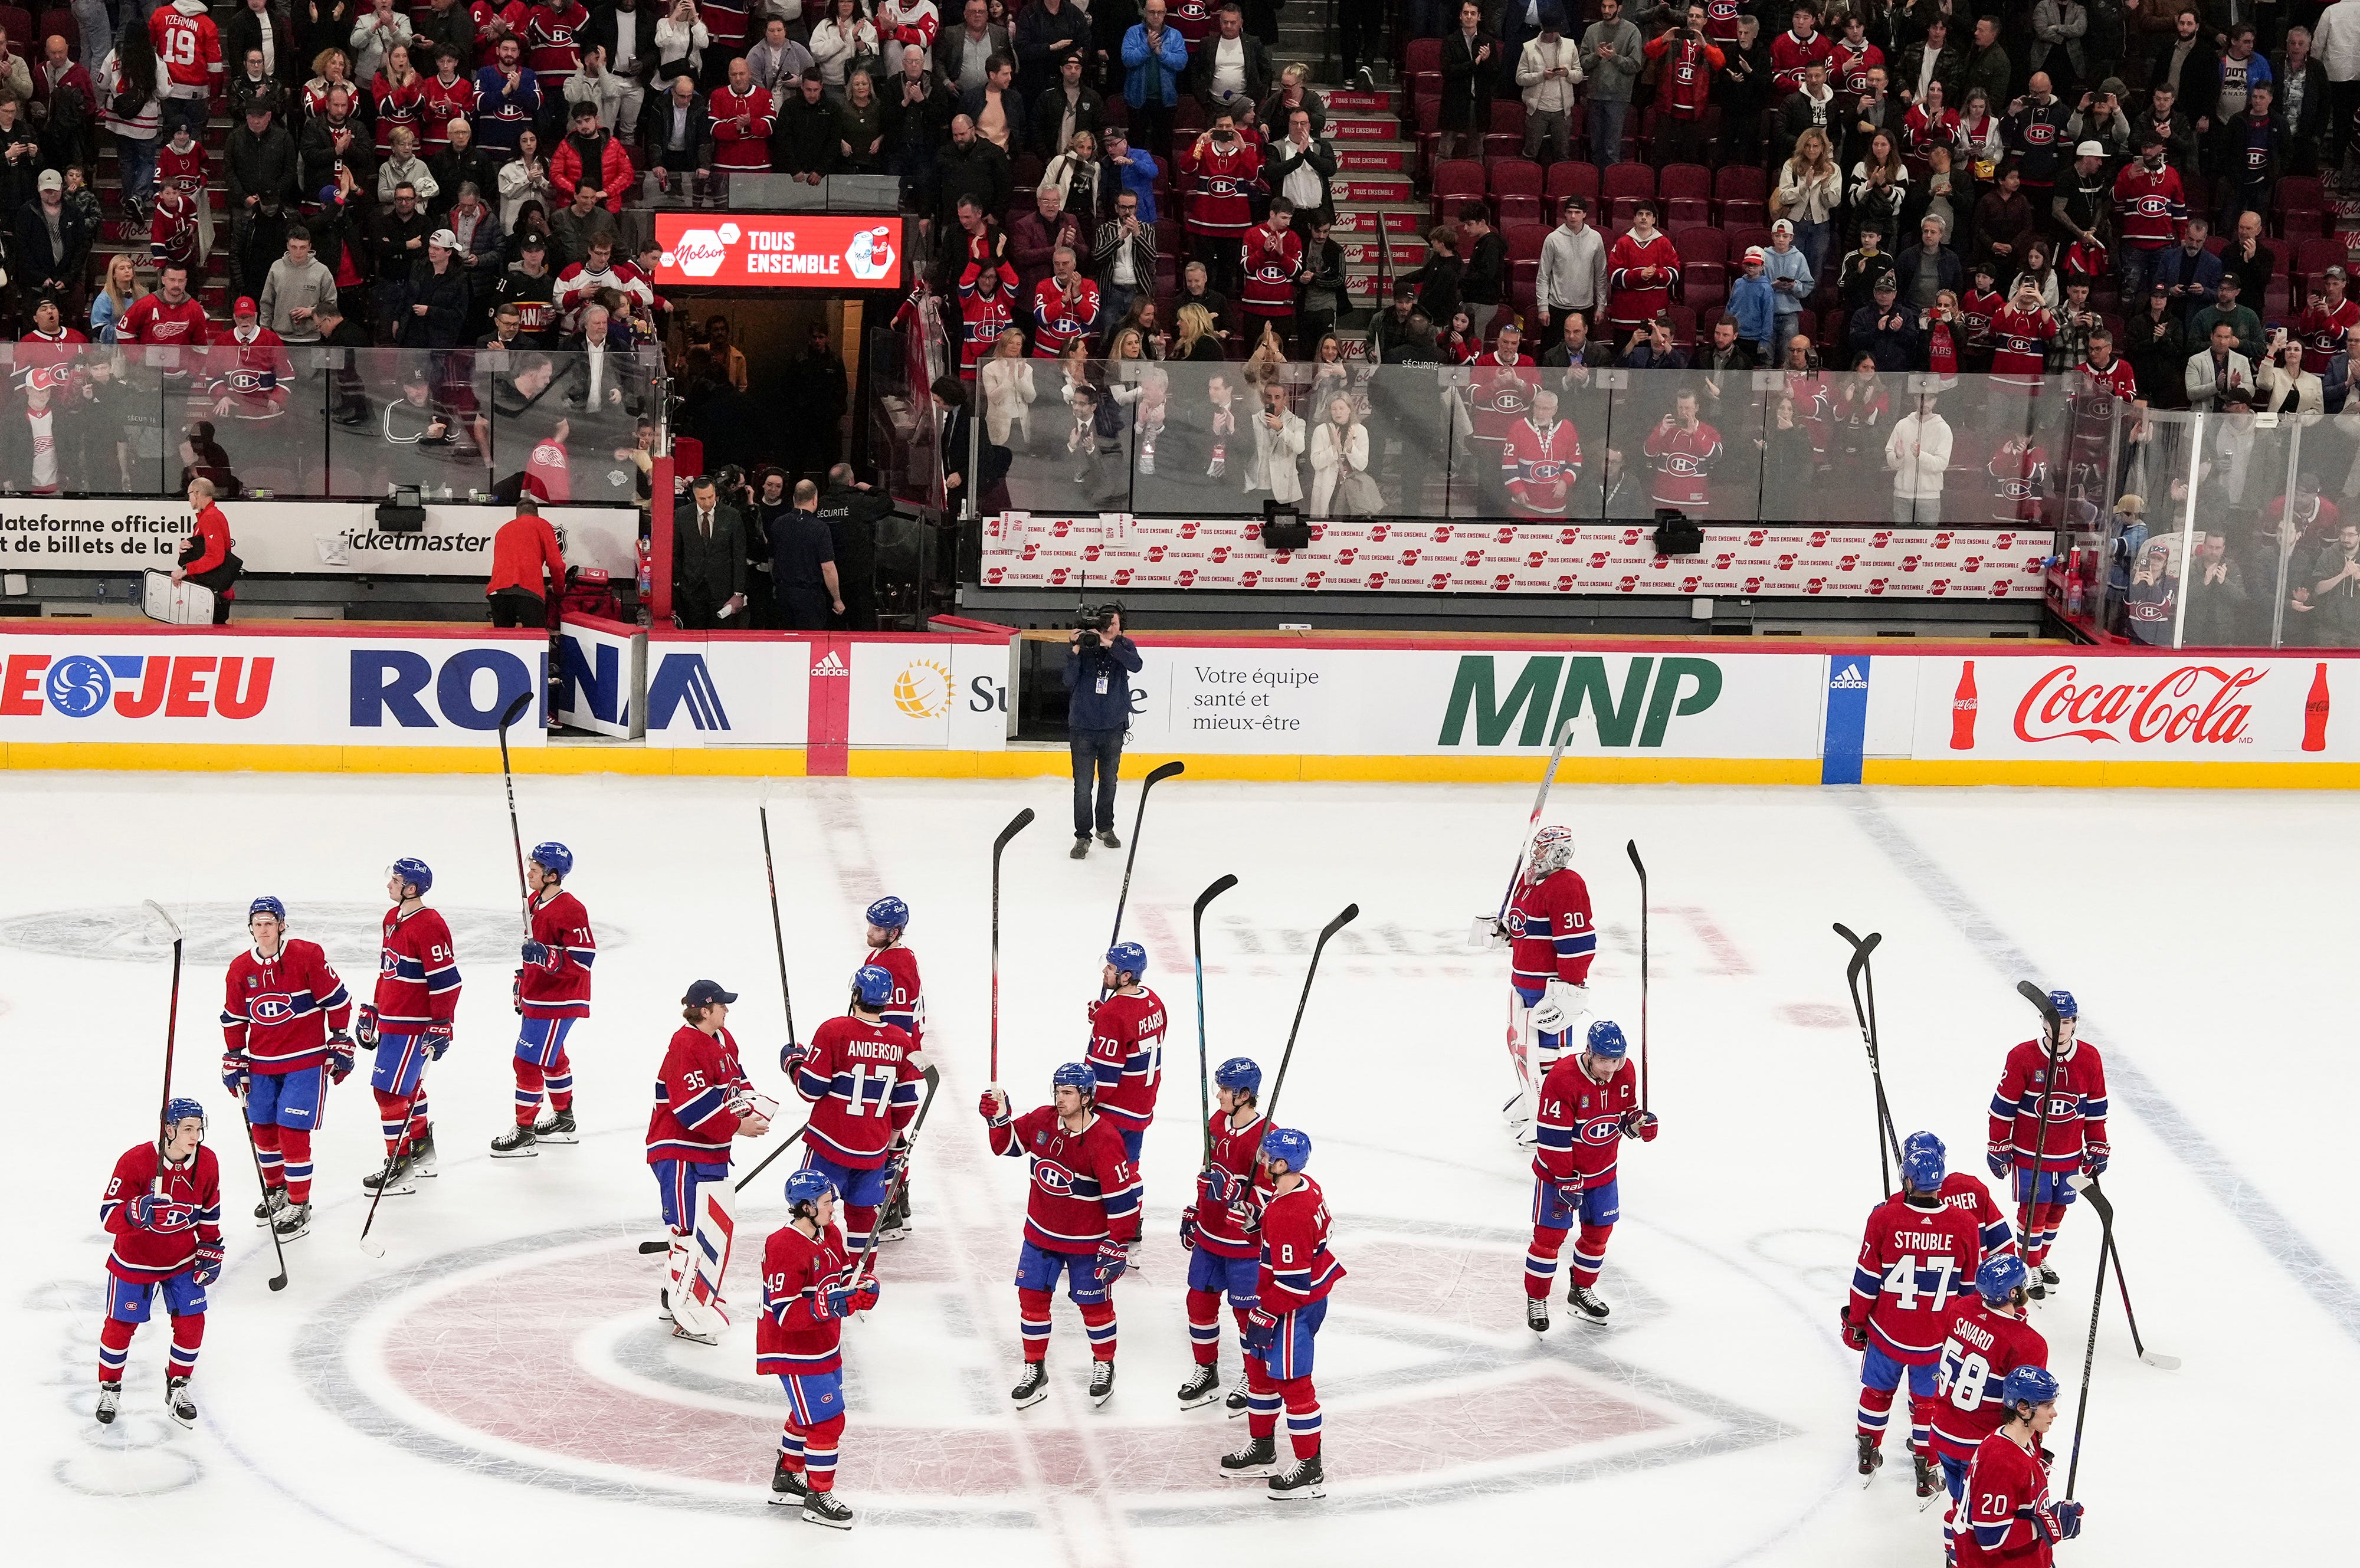 Montreal Canadiens salute the crowd following their final NHL hockey game of the season against the Detroit Red Wings.